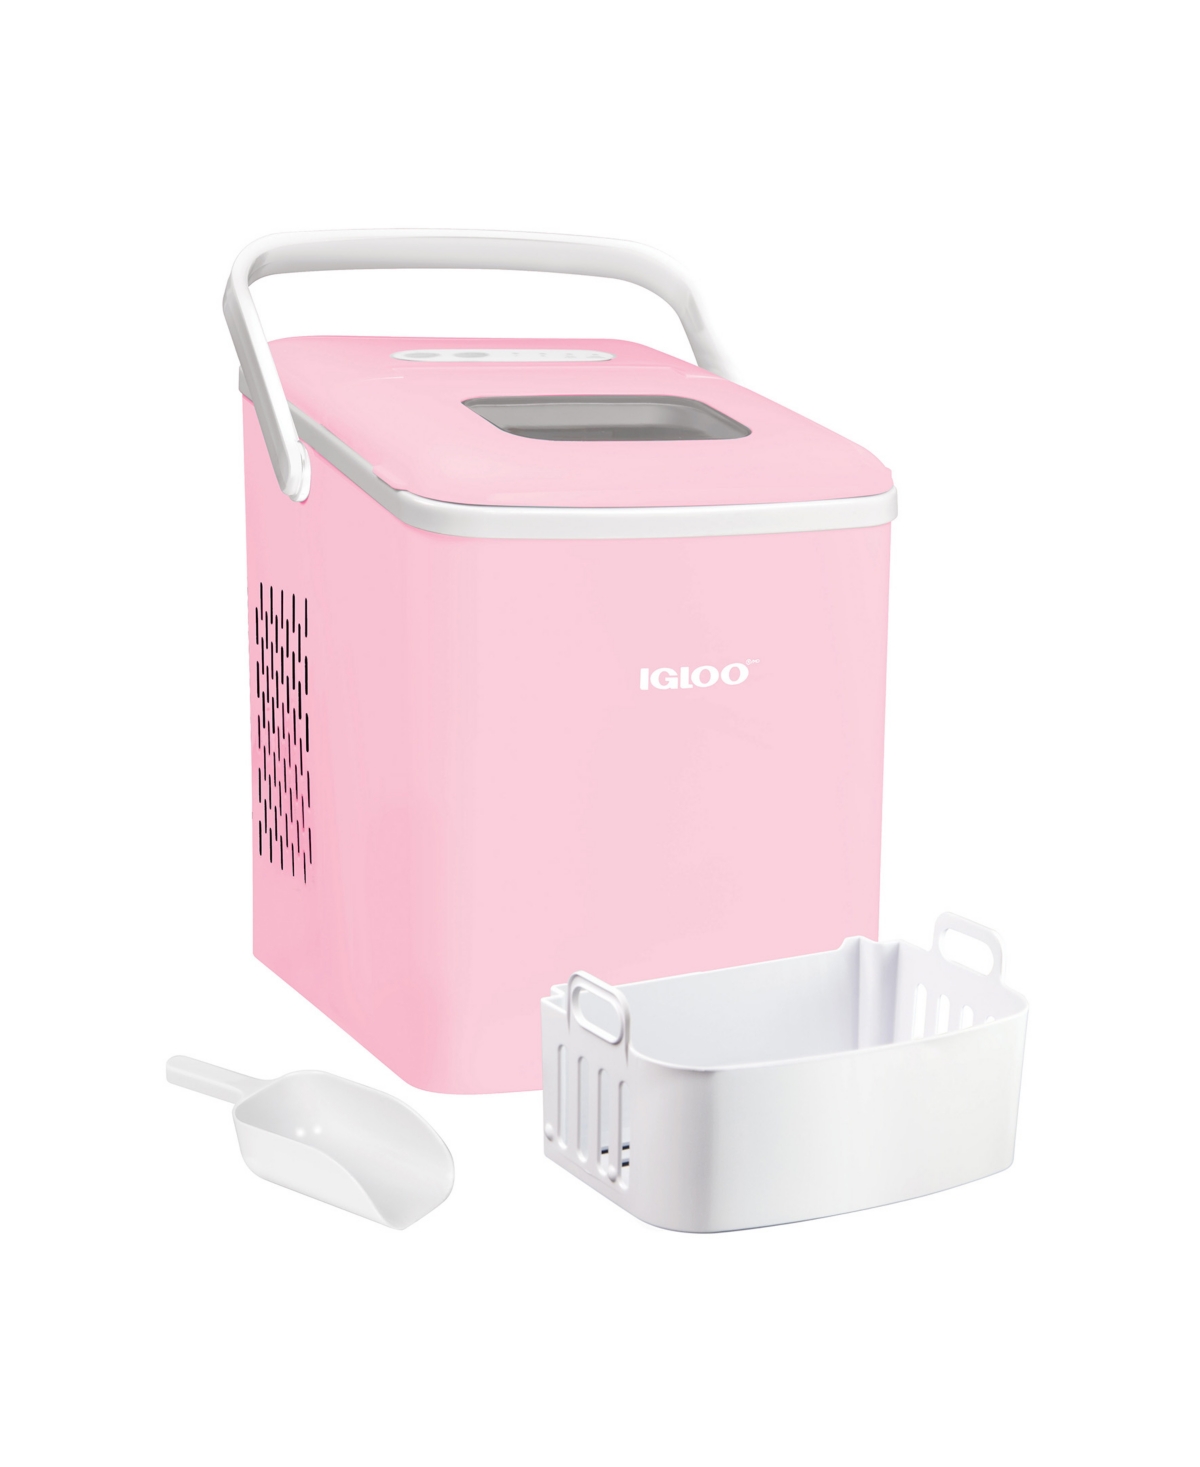 Igloo 26 Pound Automatic Self-cleaning Portable Countertop Ice Maker Machine With Handle Igliceb26hnpk In Pink